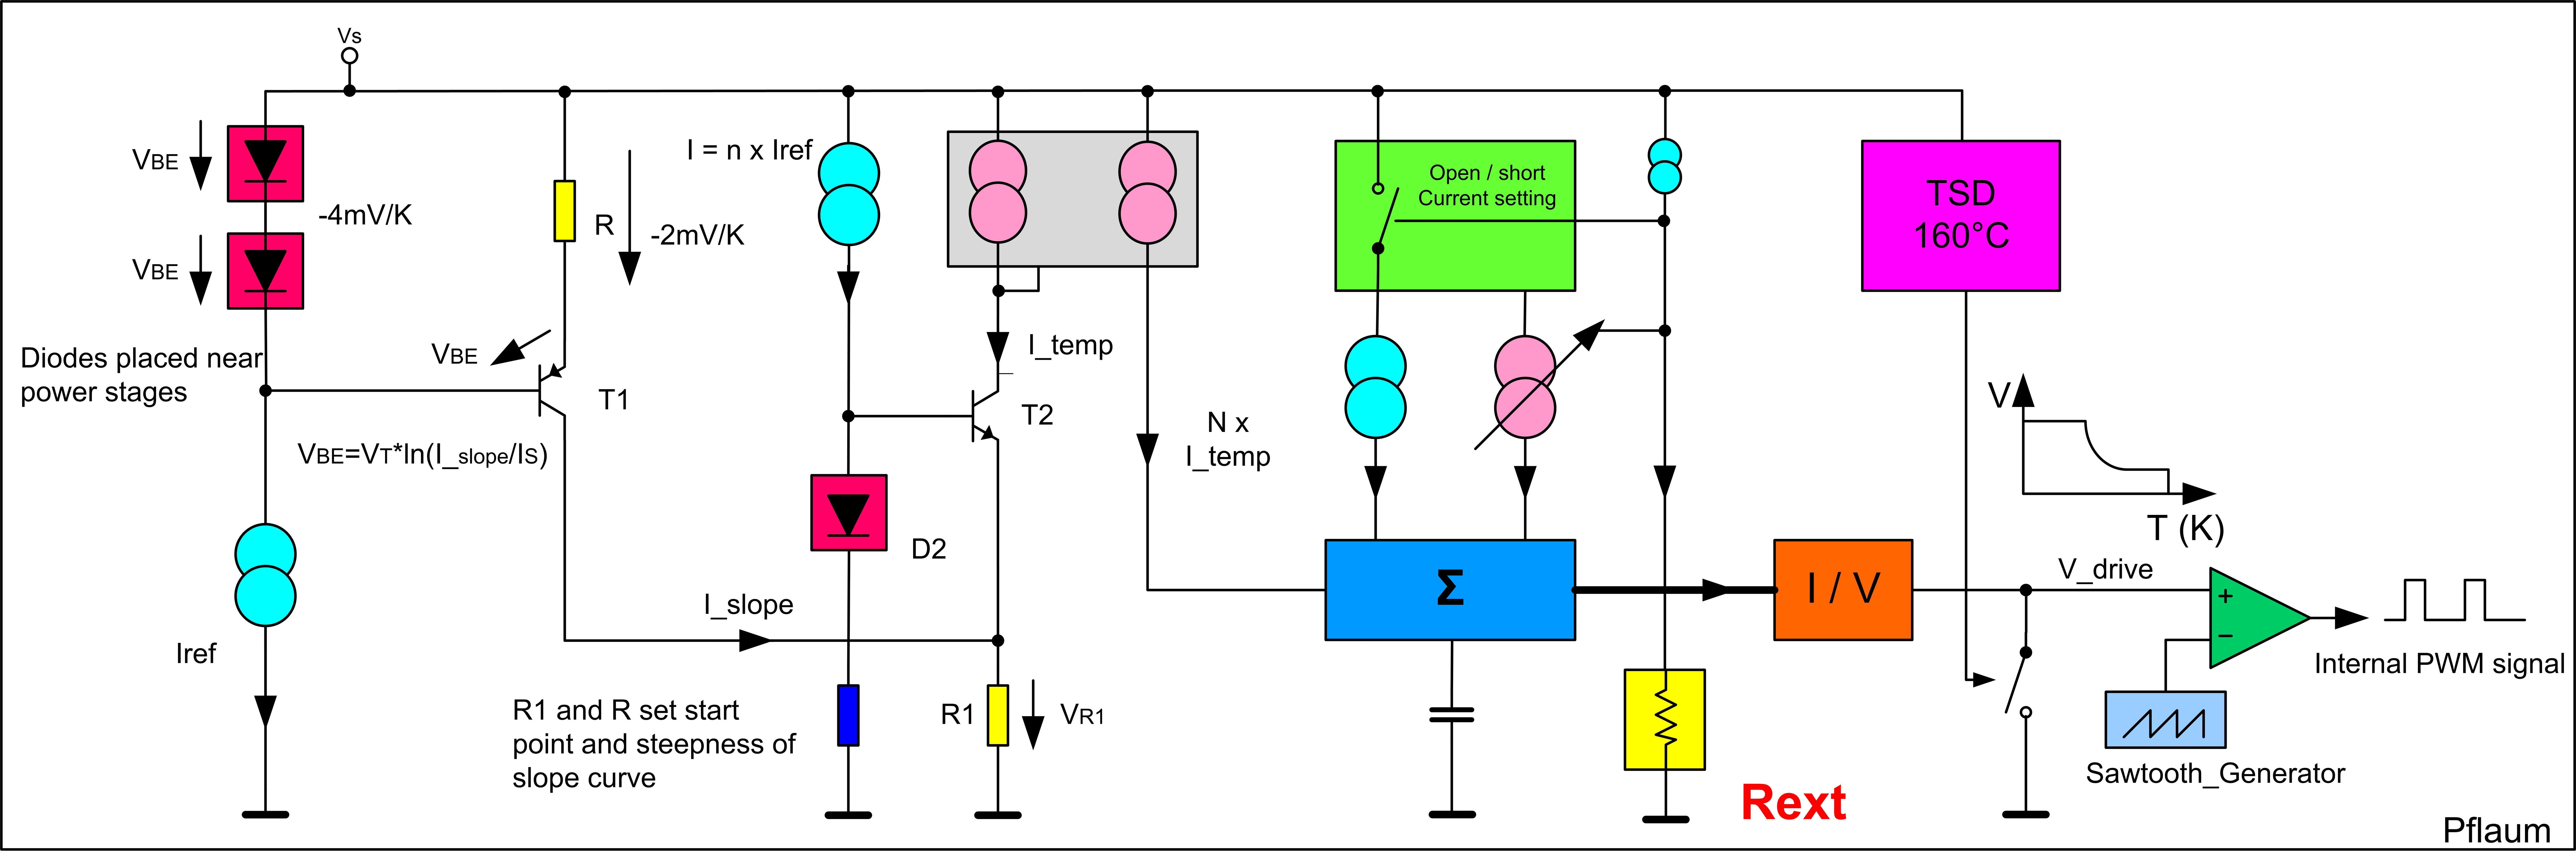 Figure 3: Simplified block diagram of the smart over temperature protection circuit